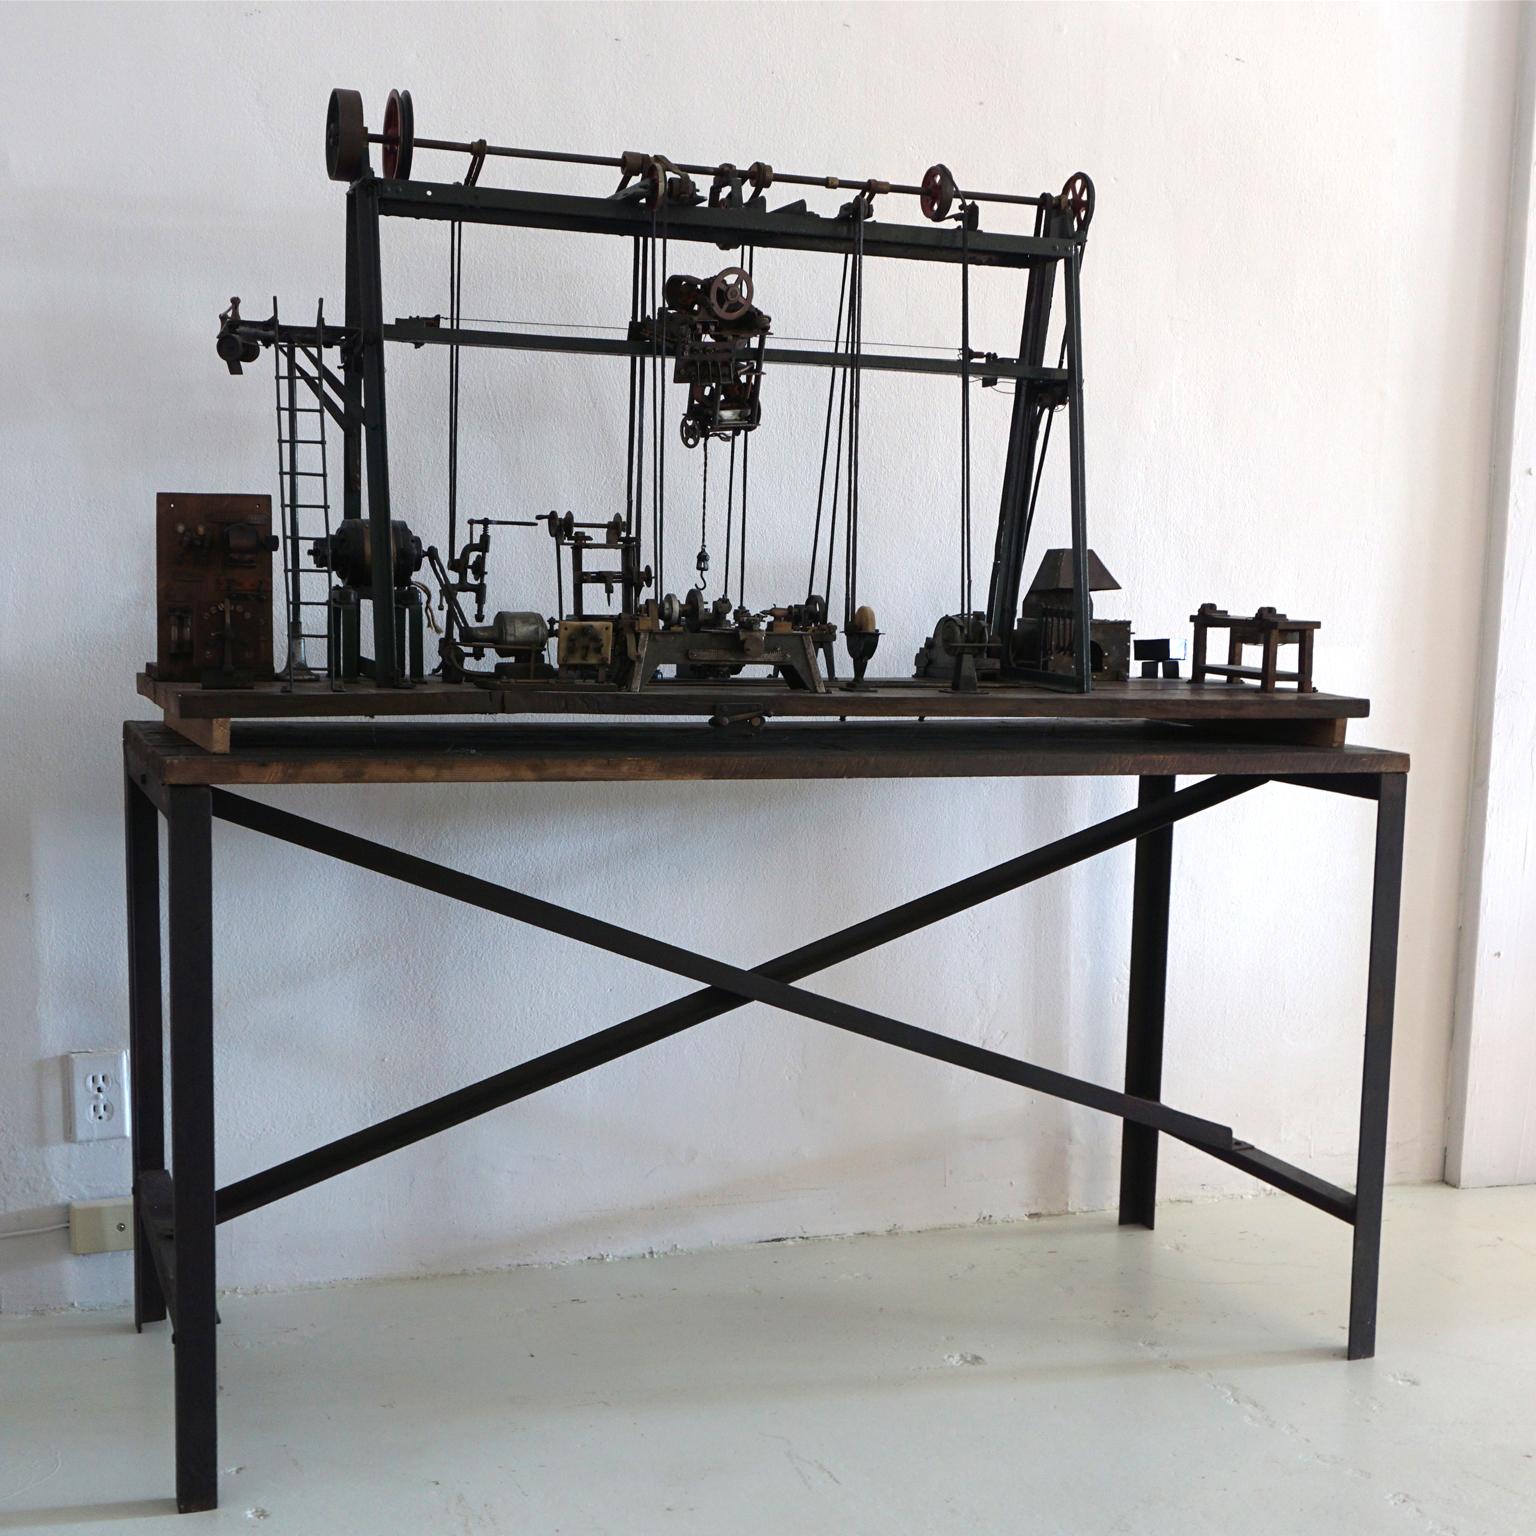 A vintage French model of a miniature industrial machine shop-factory, with oven, a testimony of the industrial revolution (museum quality). Wooden base with simple iron legs is included. The model is in good condition. Wear consistent with age and